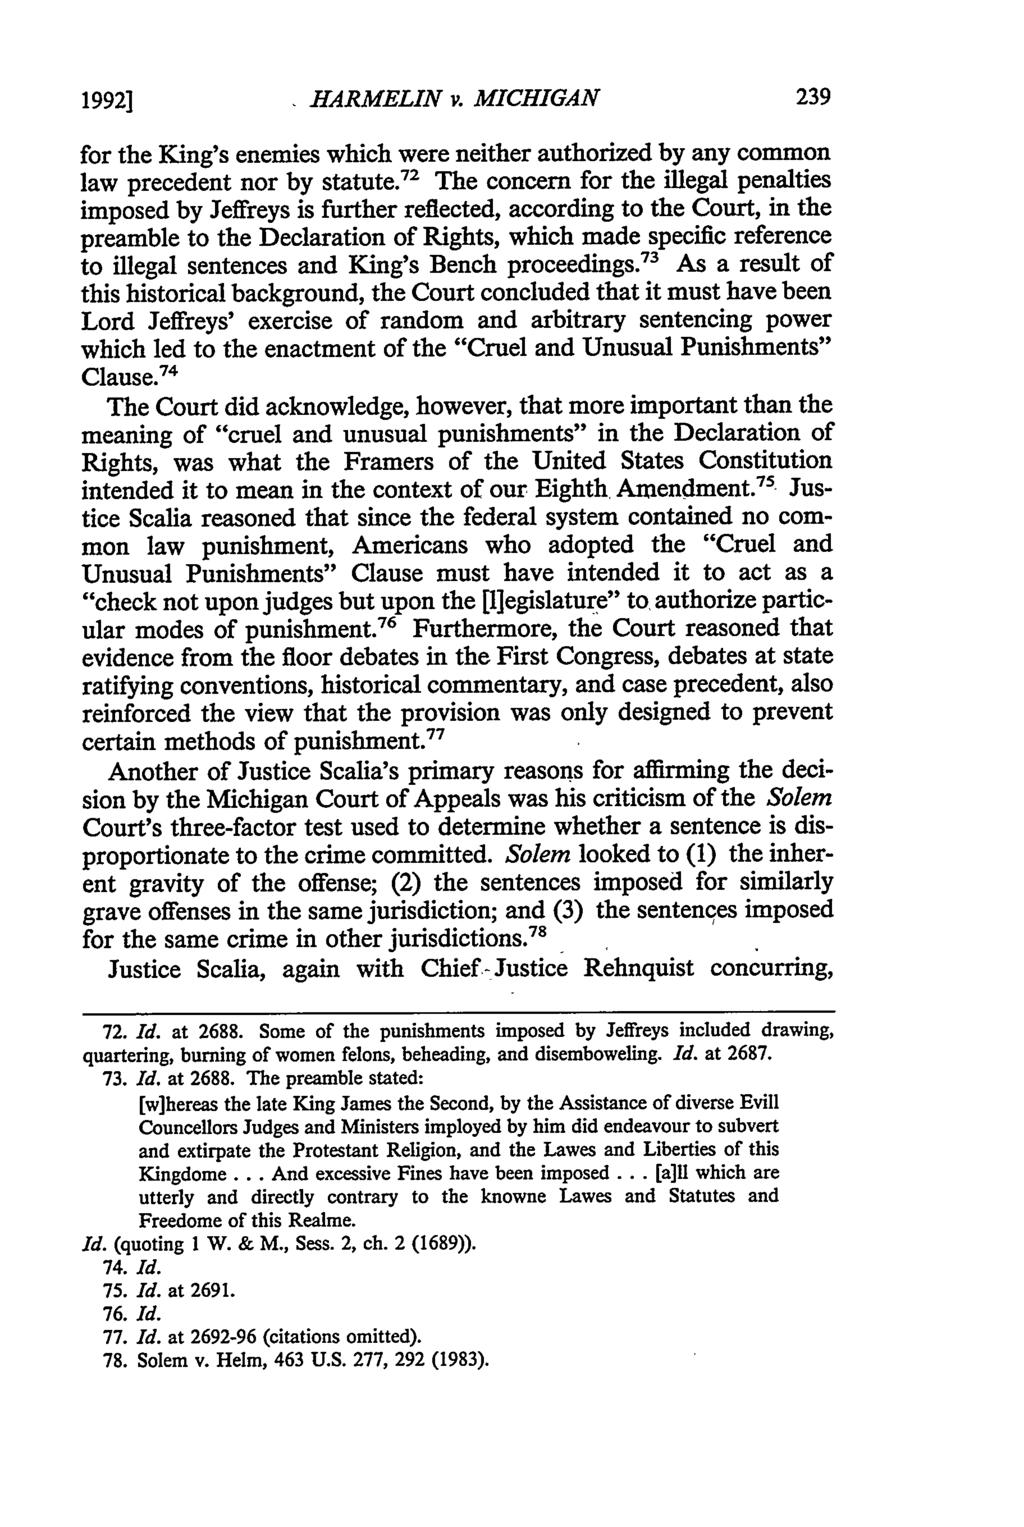 1992] HARMELIN v. MICHIGAN for the King's enemies which were neither authorized by any common law precedent nor by statute.